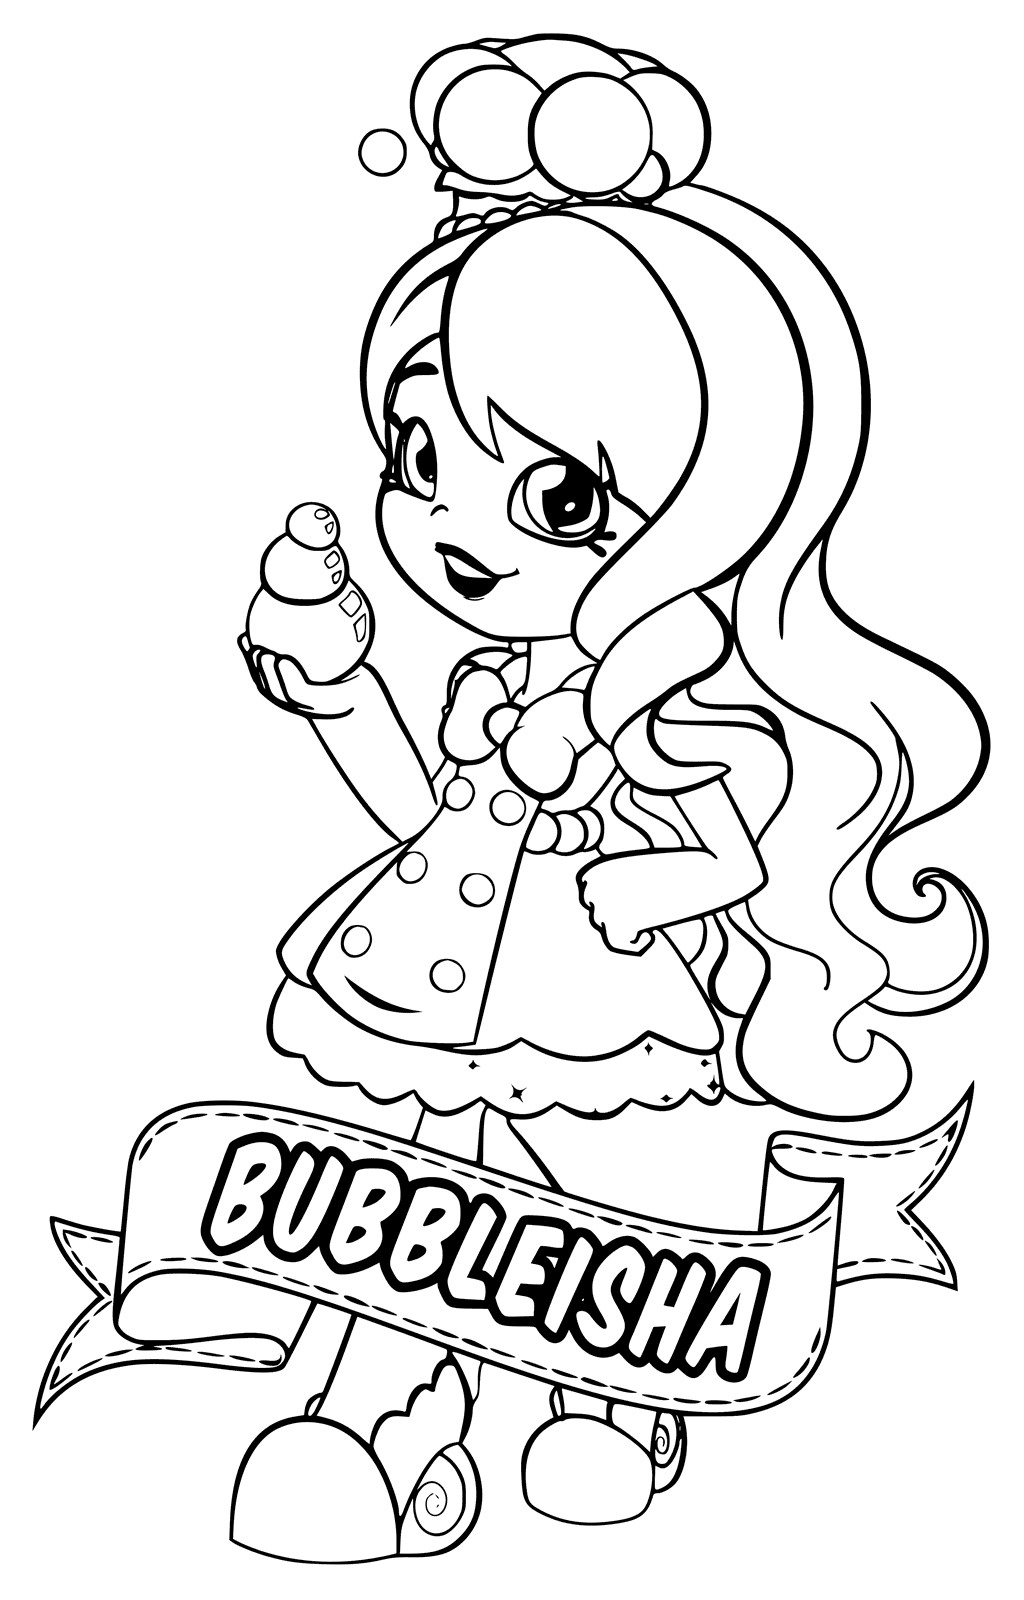 Shopkins Girls Coloring Pages
 Shoppies Coloring Pages SHOPKINS